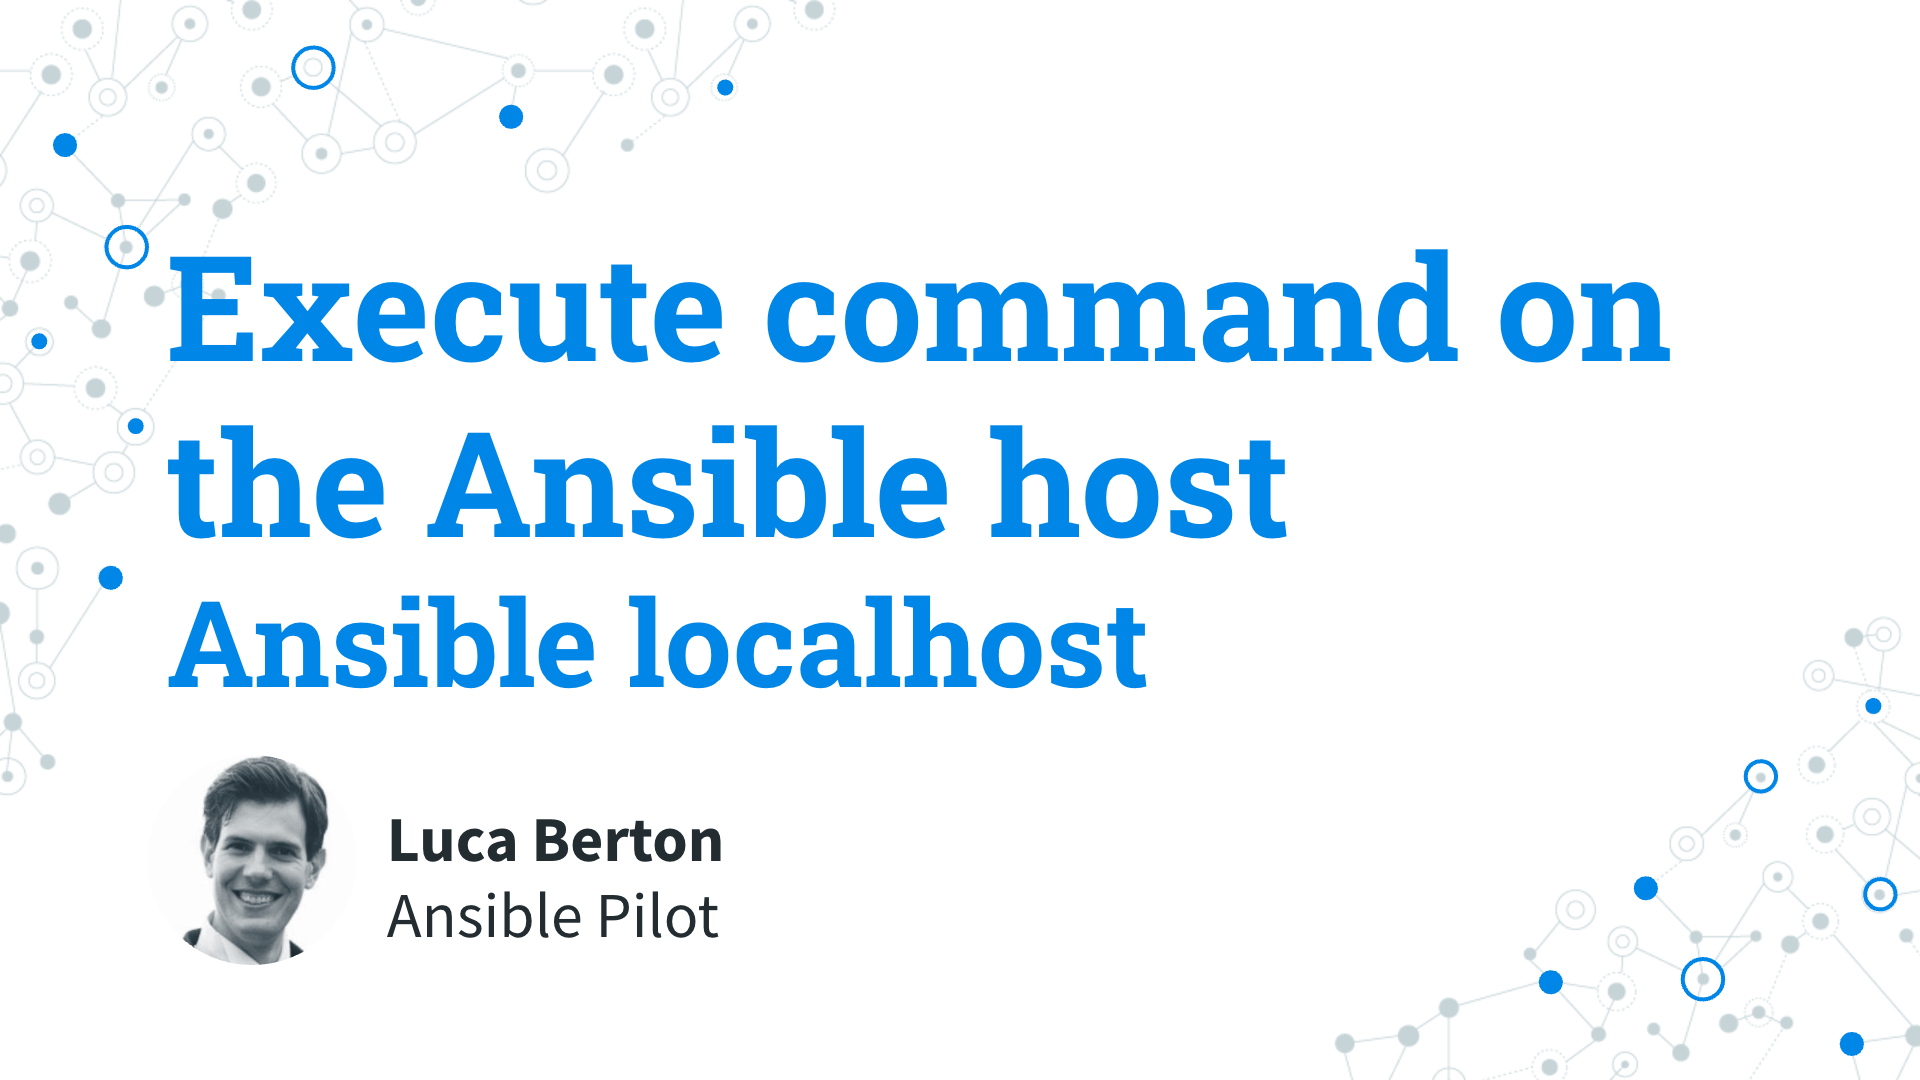 Execute command on the Ansible host - Ansible localhost